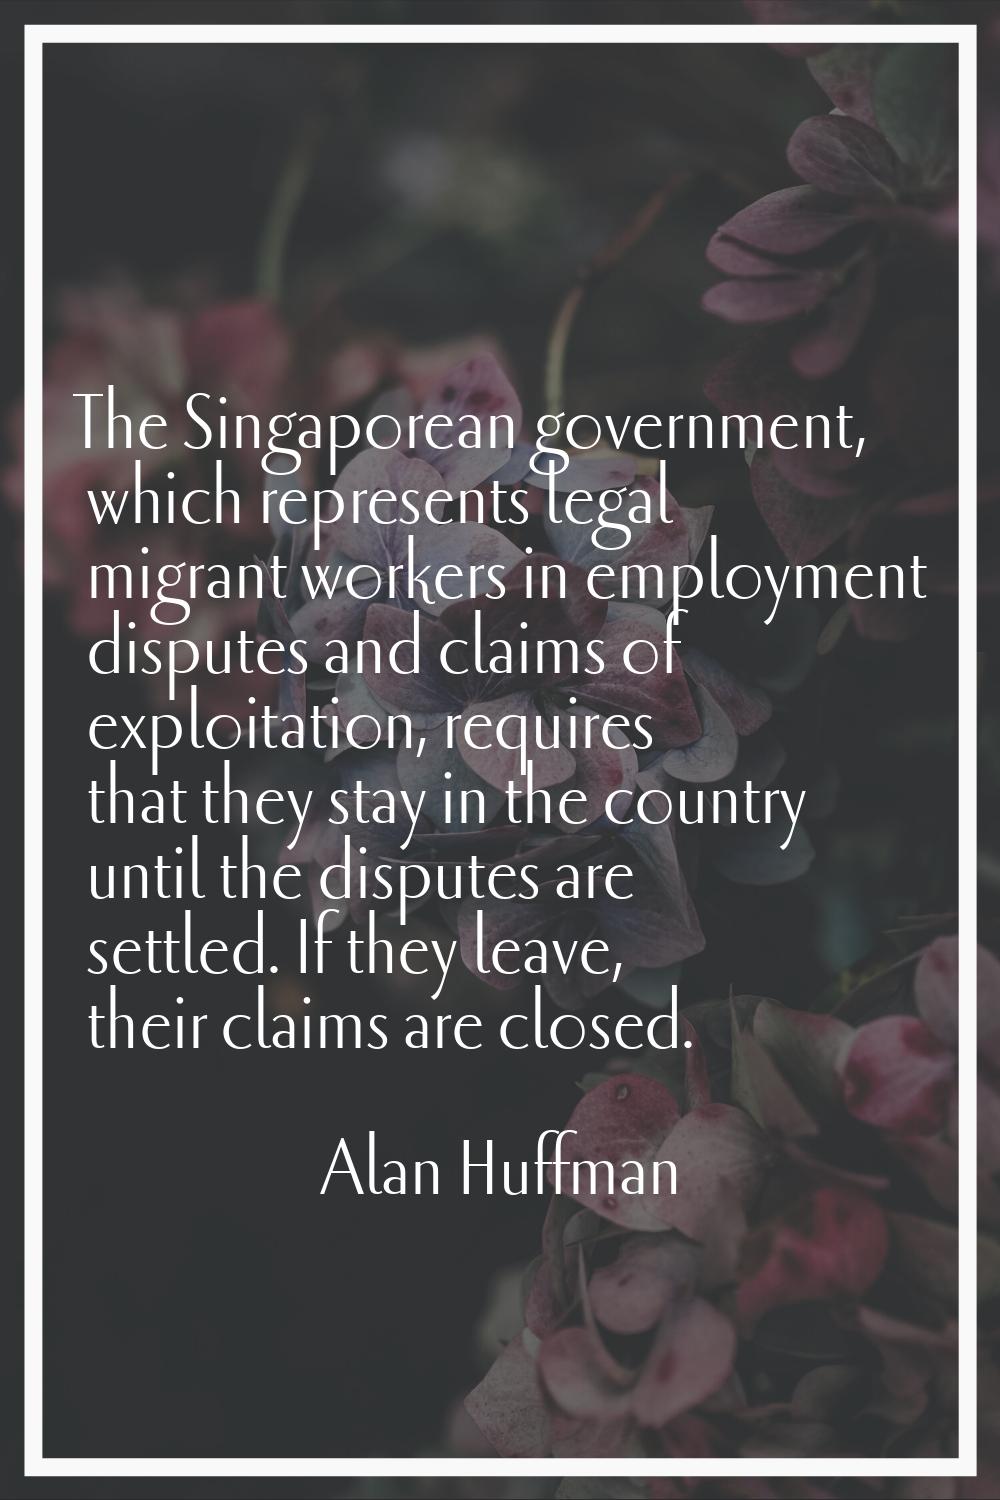 The Singaporean government, which represents legal migrant workers in employment disputes and claim